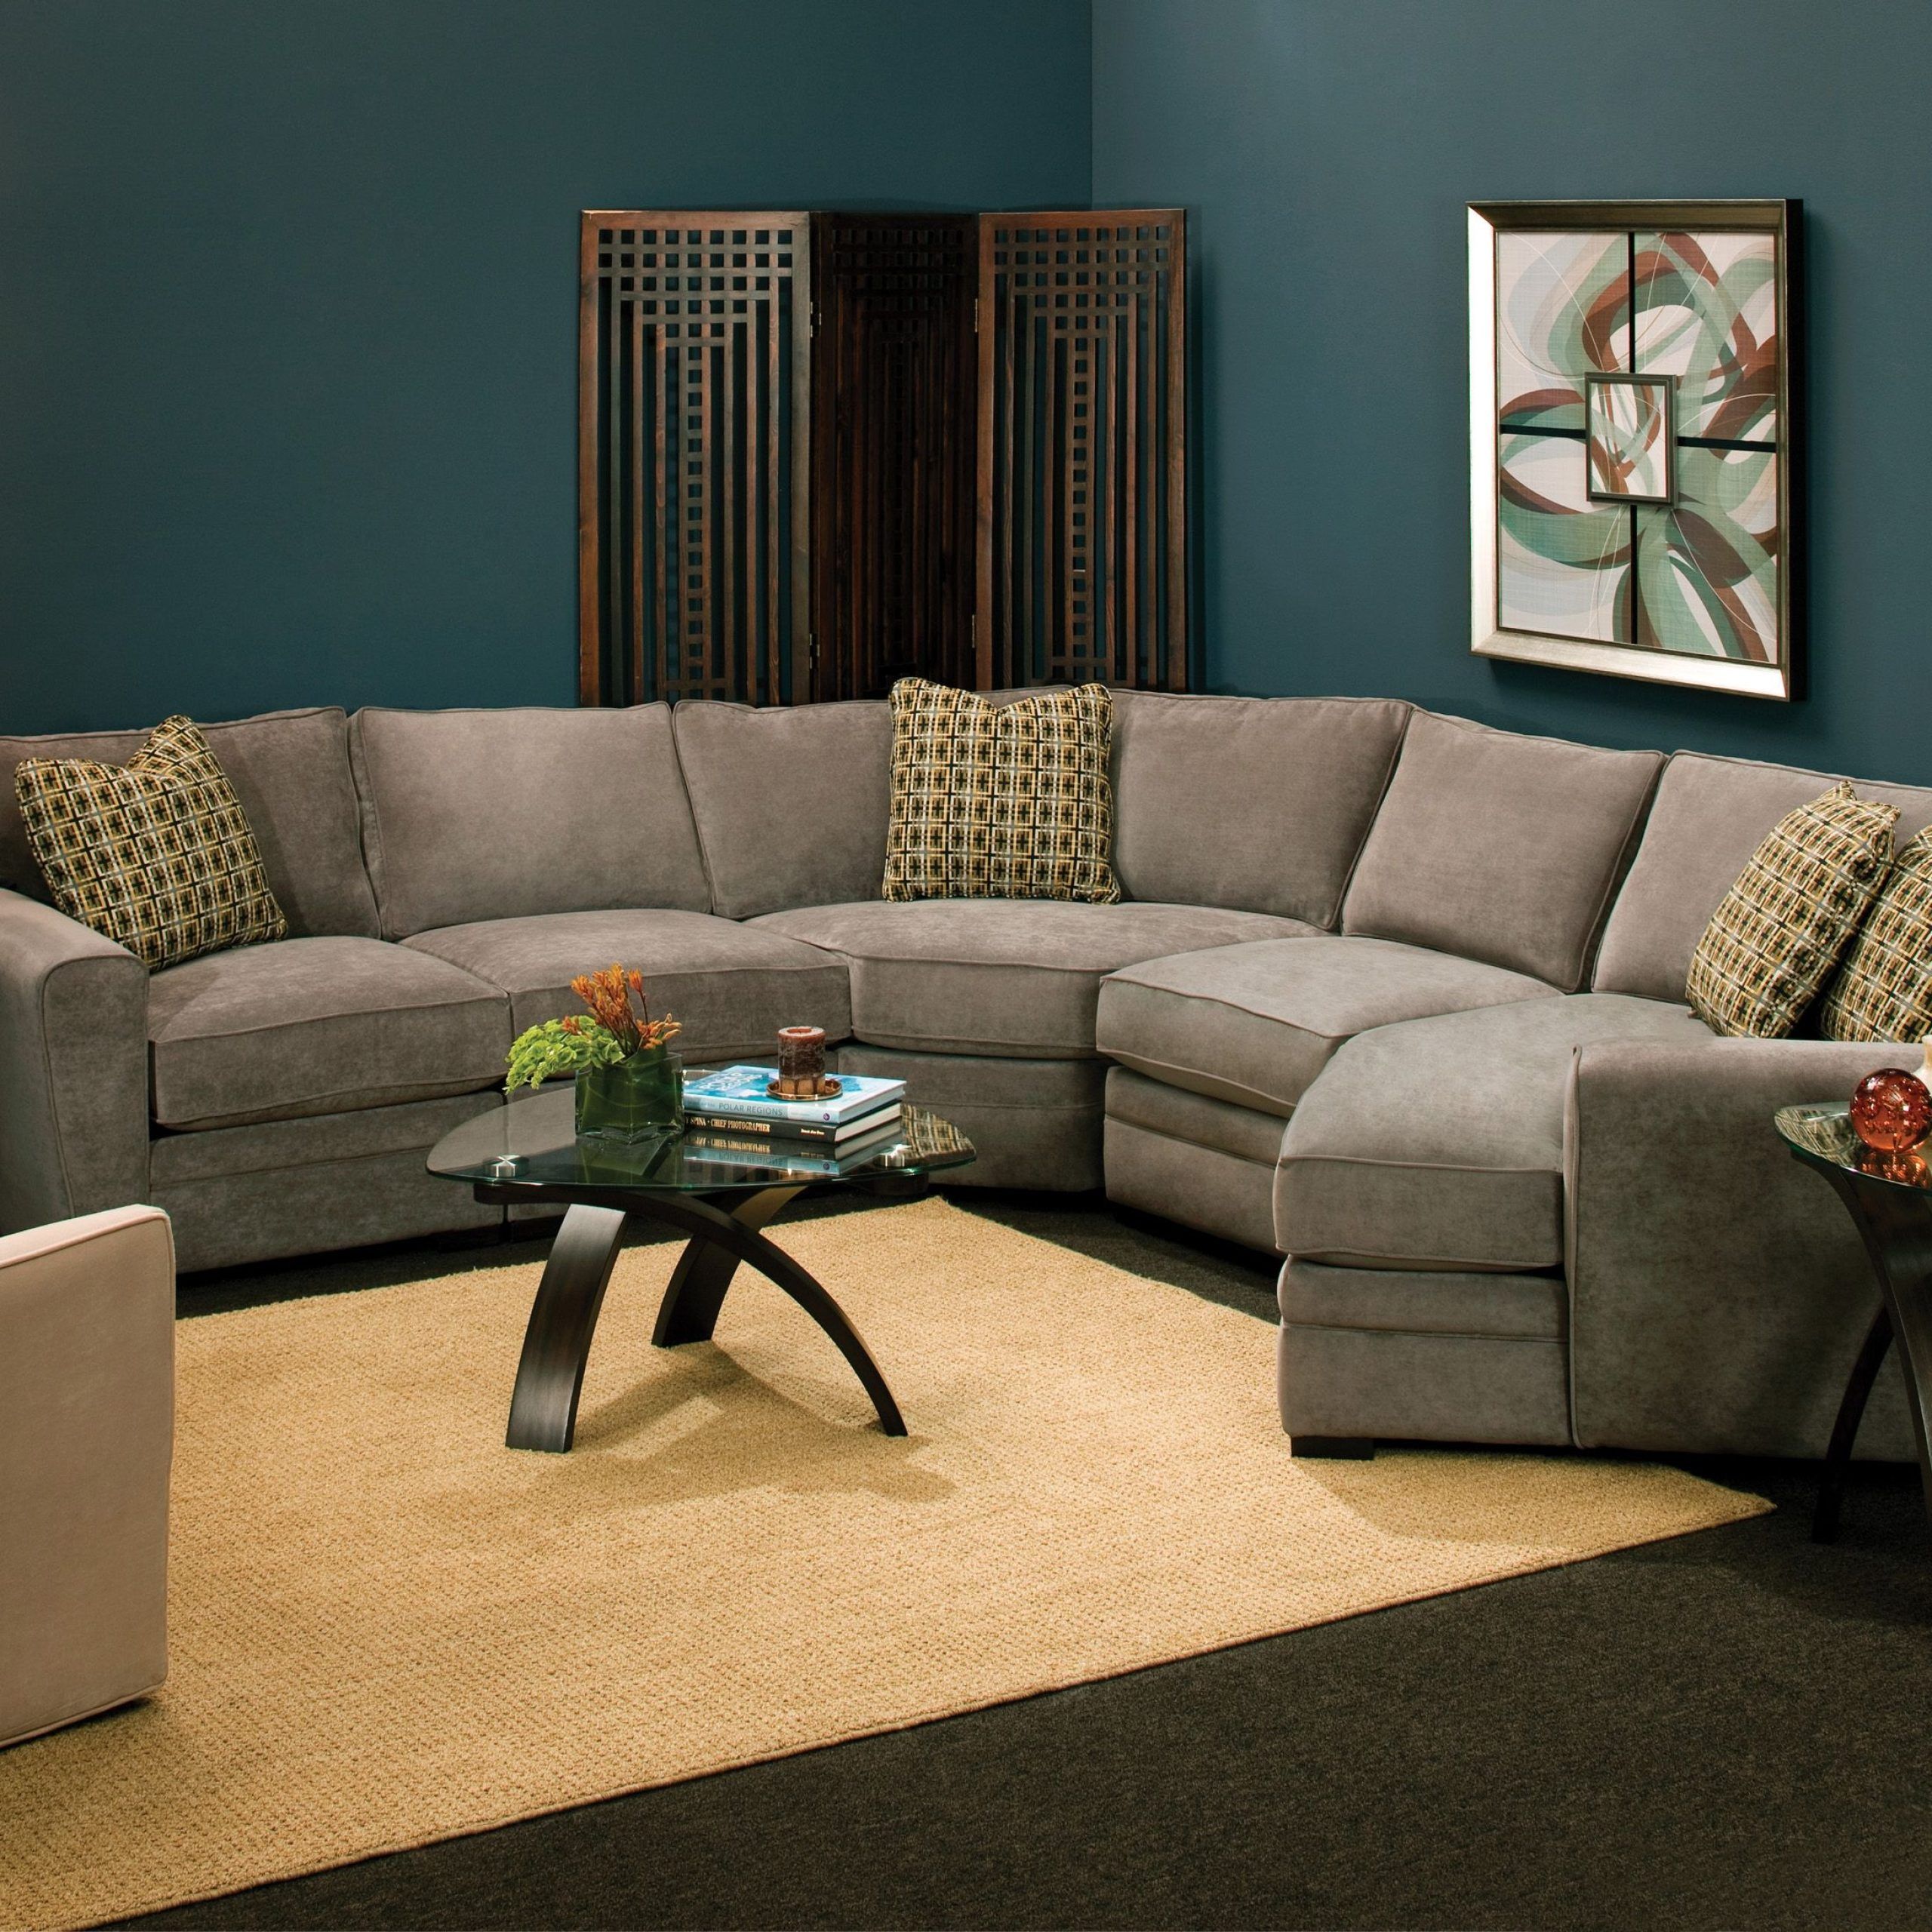 This Artemis Ii 4 Piece Microfiber Sectional Sofa Is So Easy To Inside Microfiber Sectional Corner Sofas (View 13 of 20)